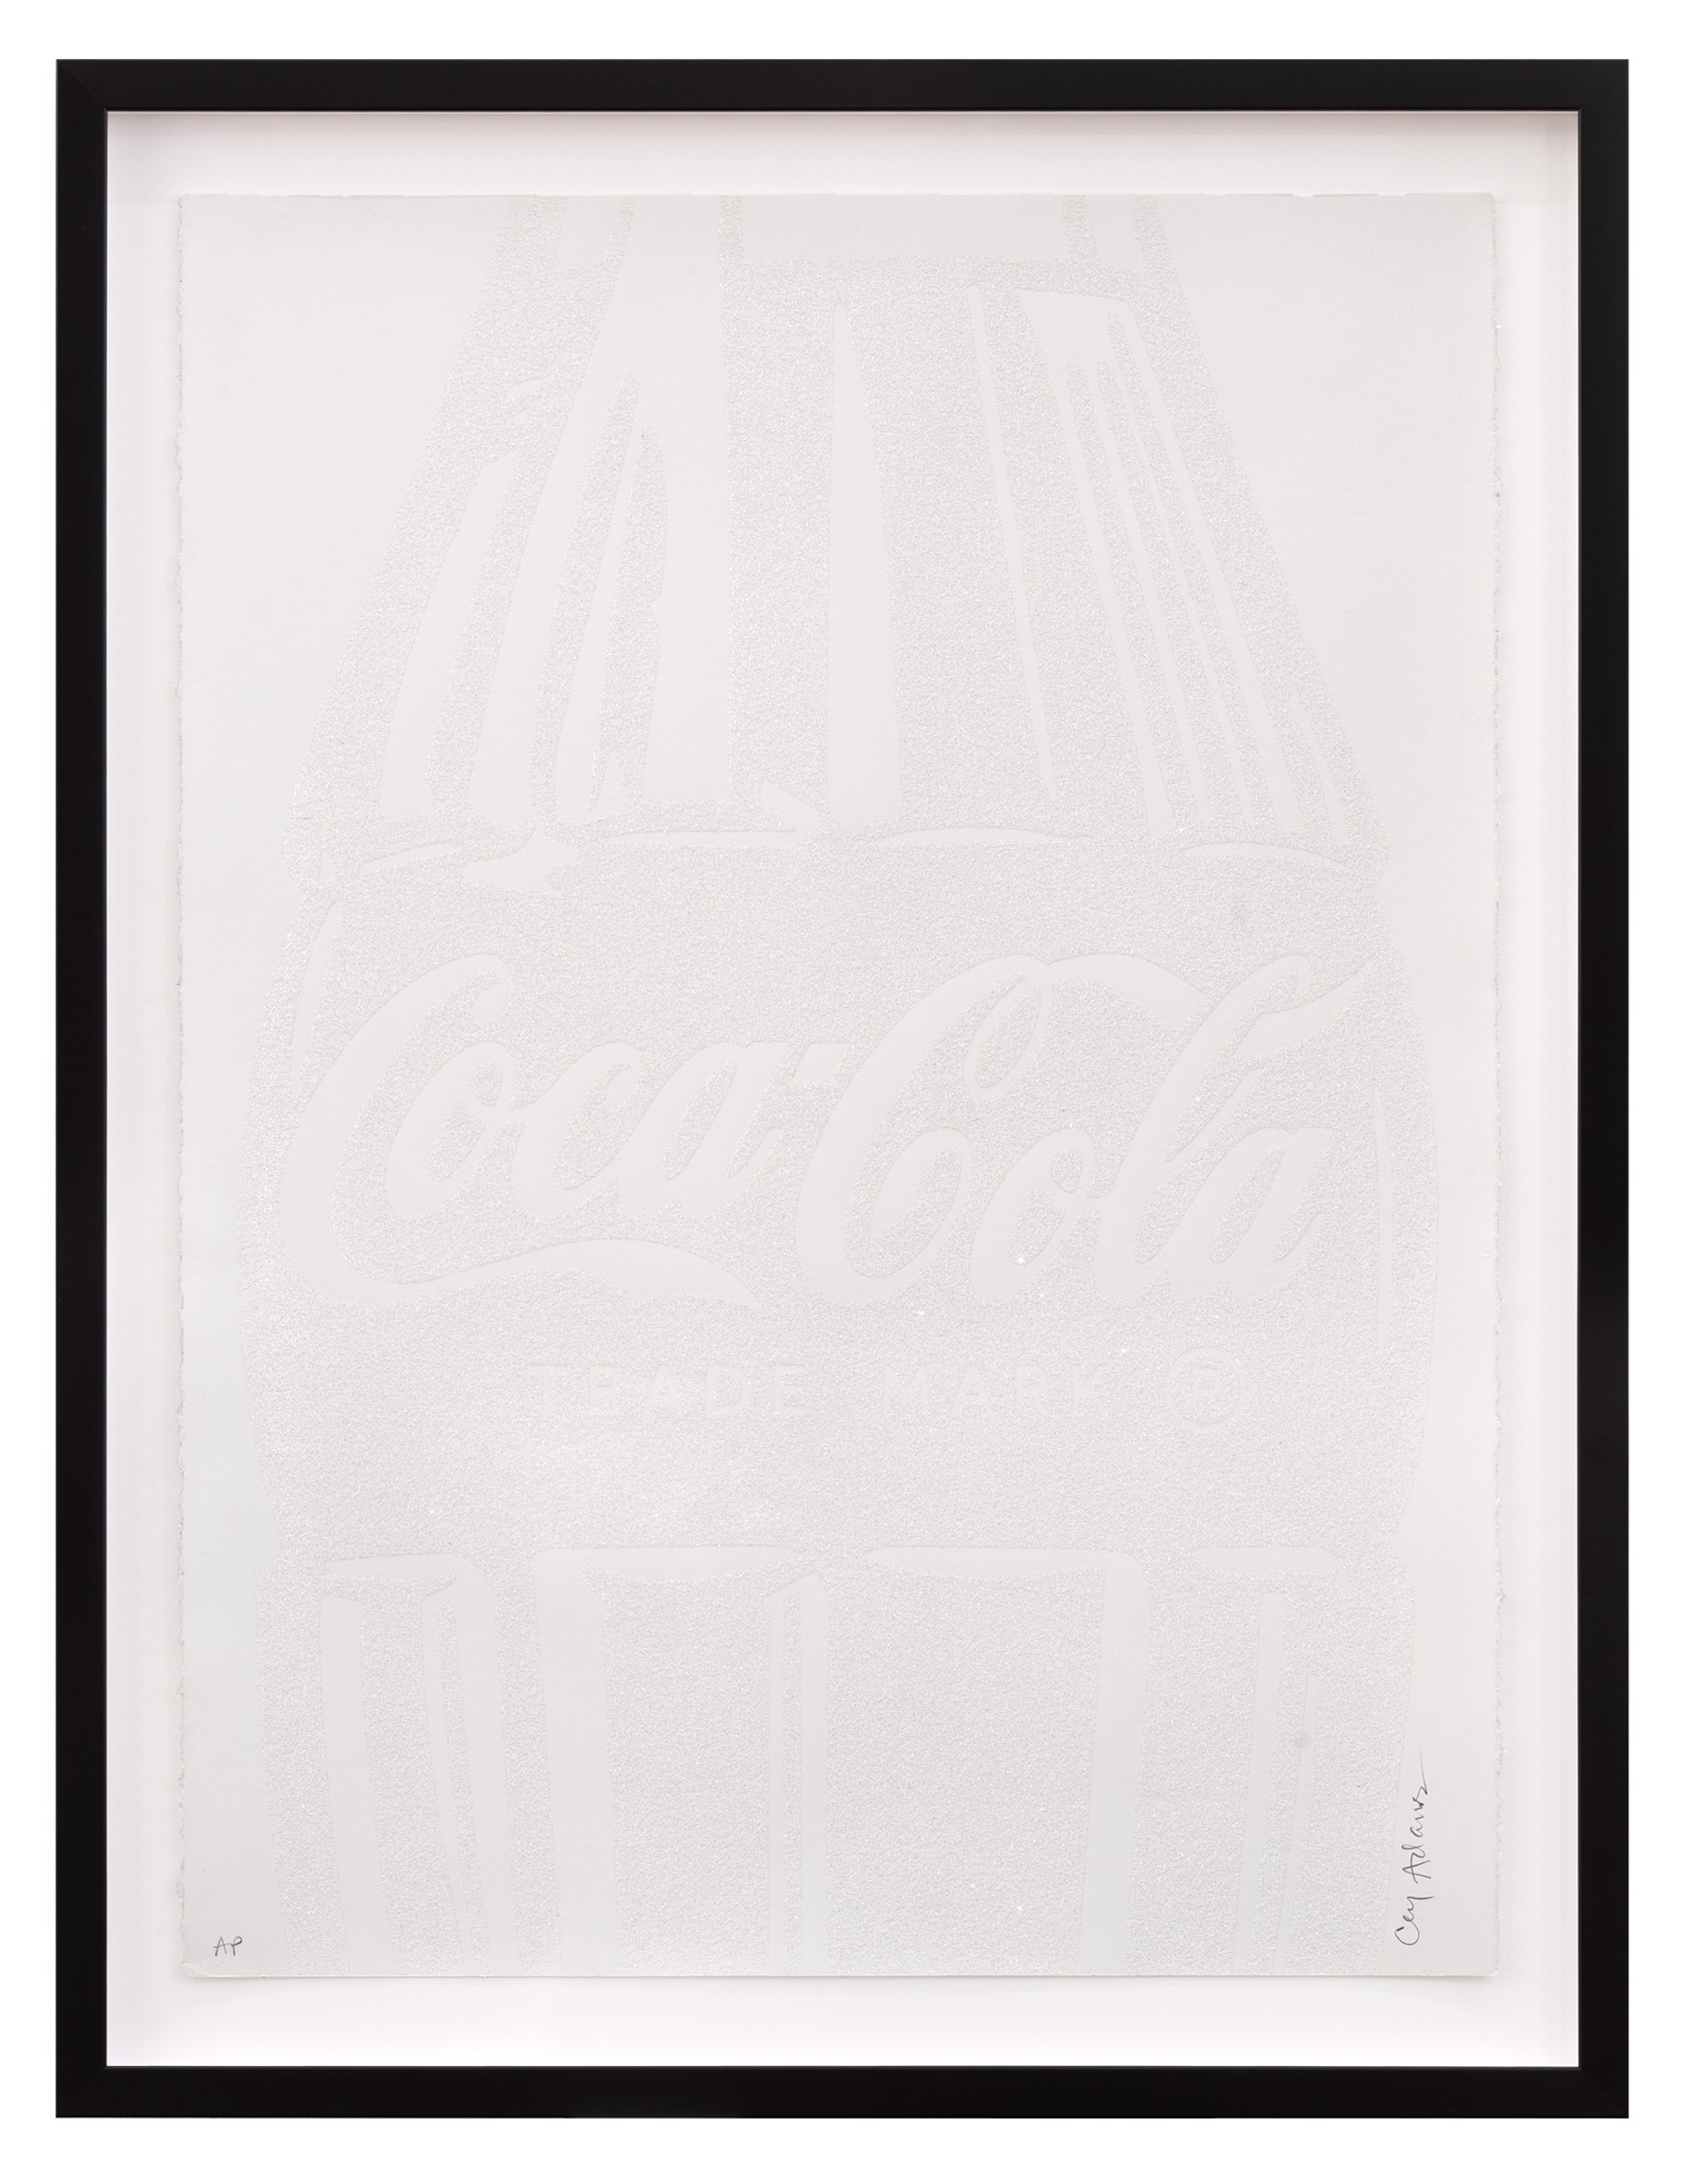 Single Coca-Cola (white on white) by Cey Adams